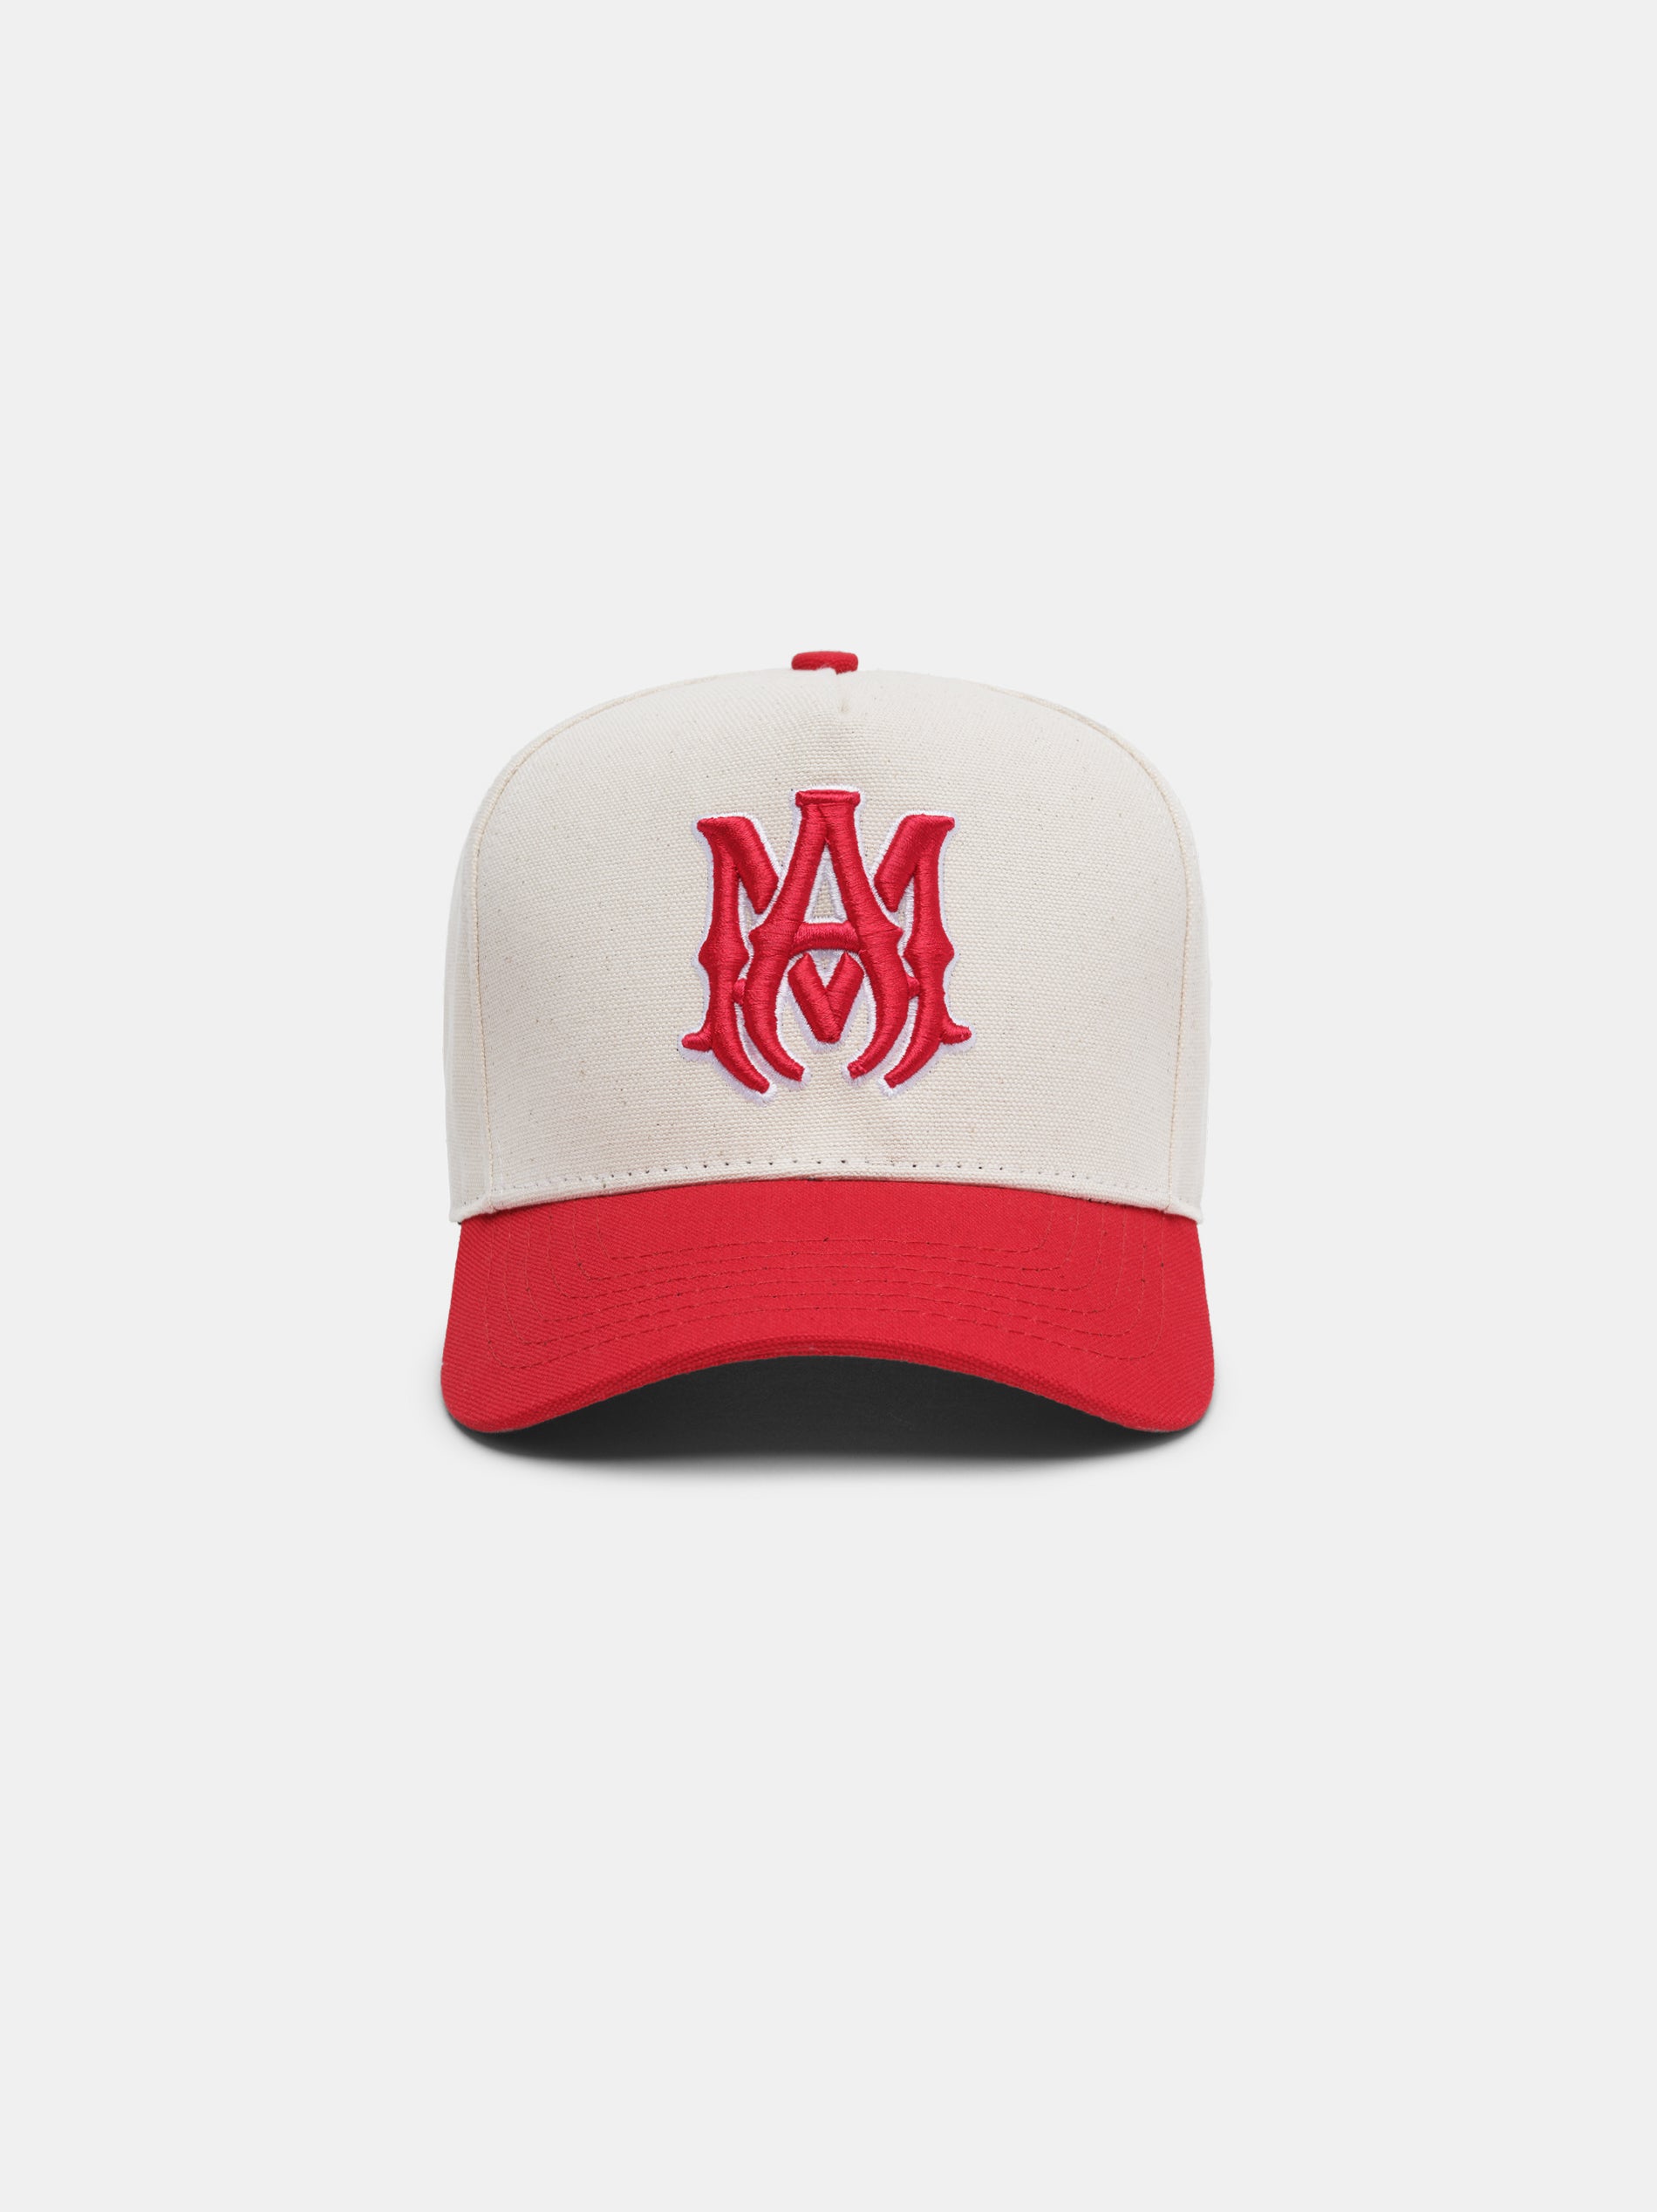 Product MA CANVAS HAT - Alabaster Red featured image